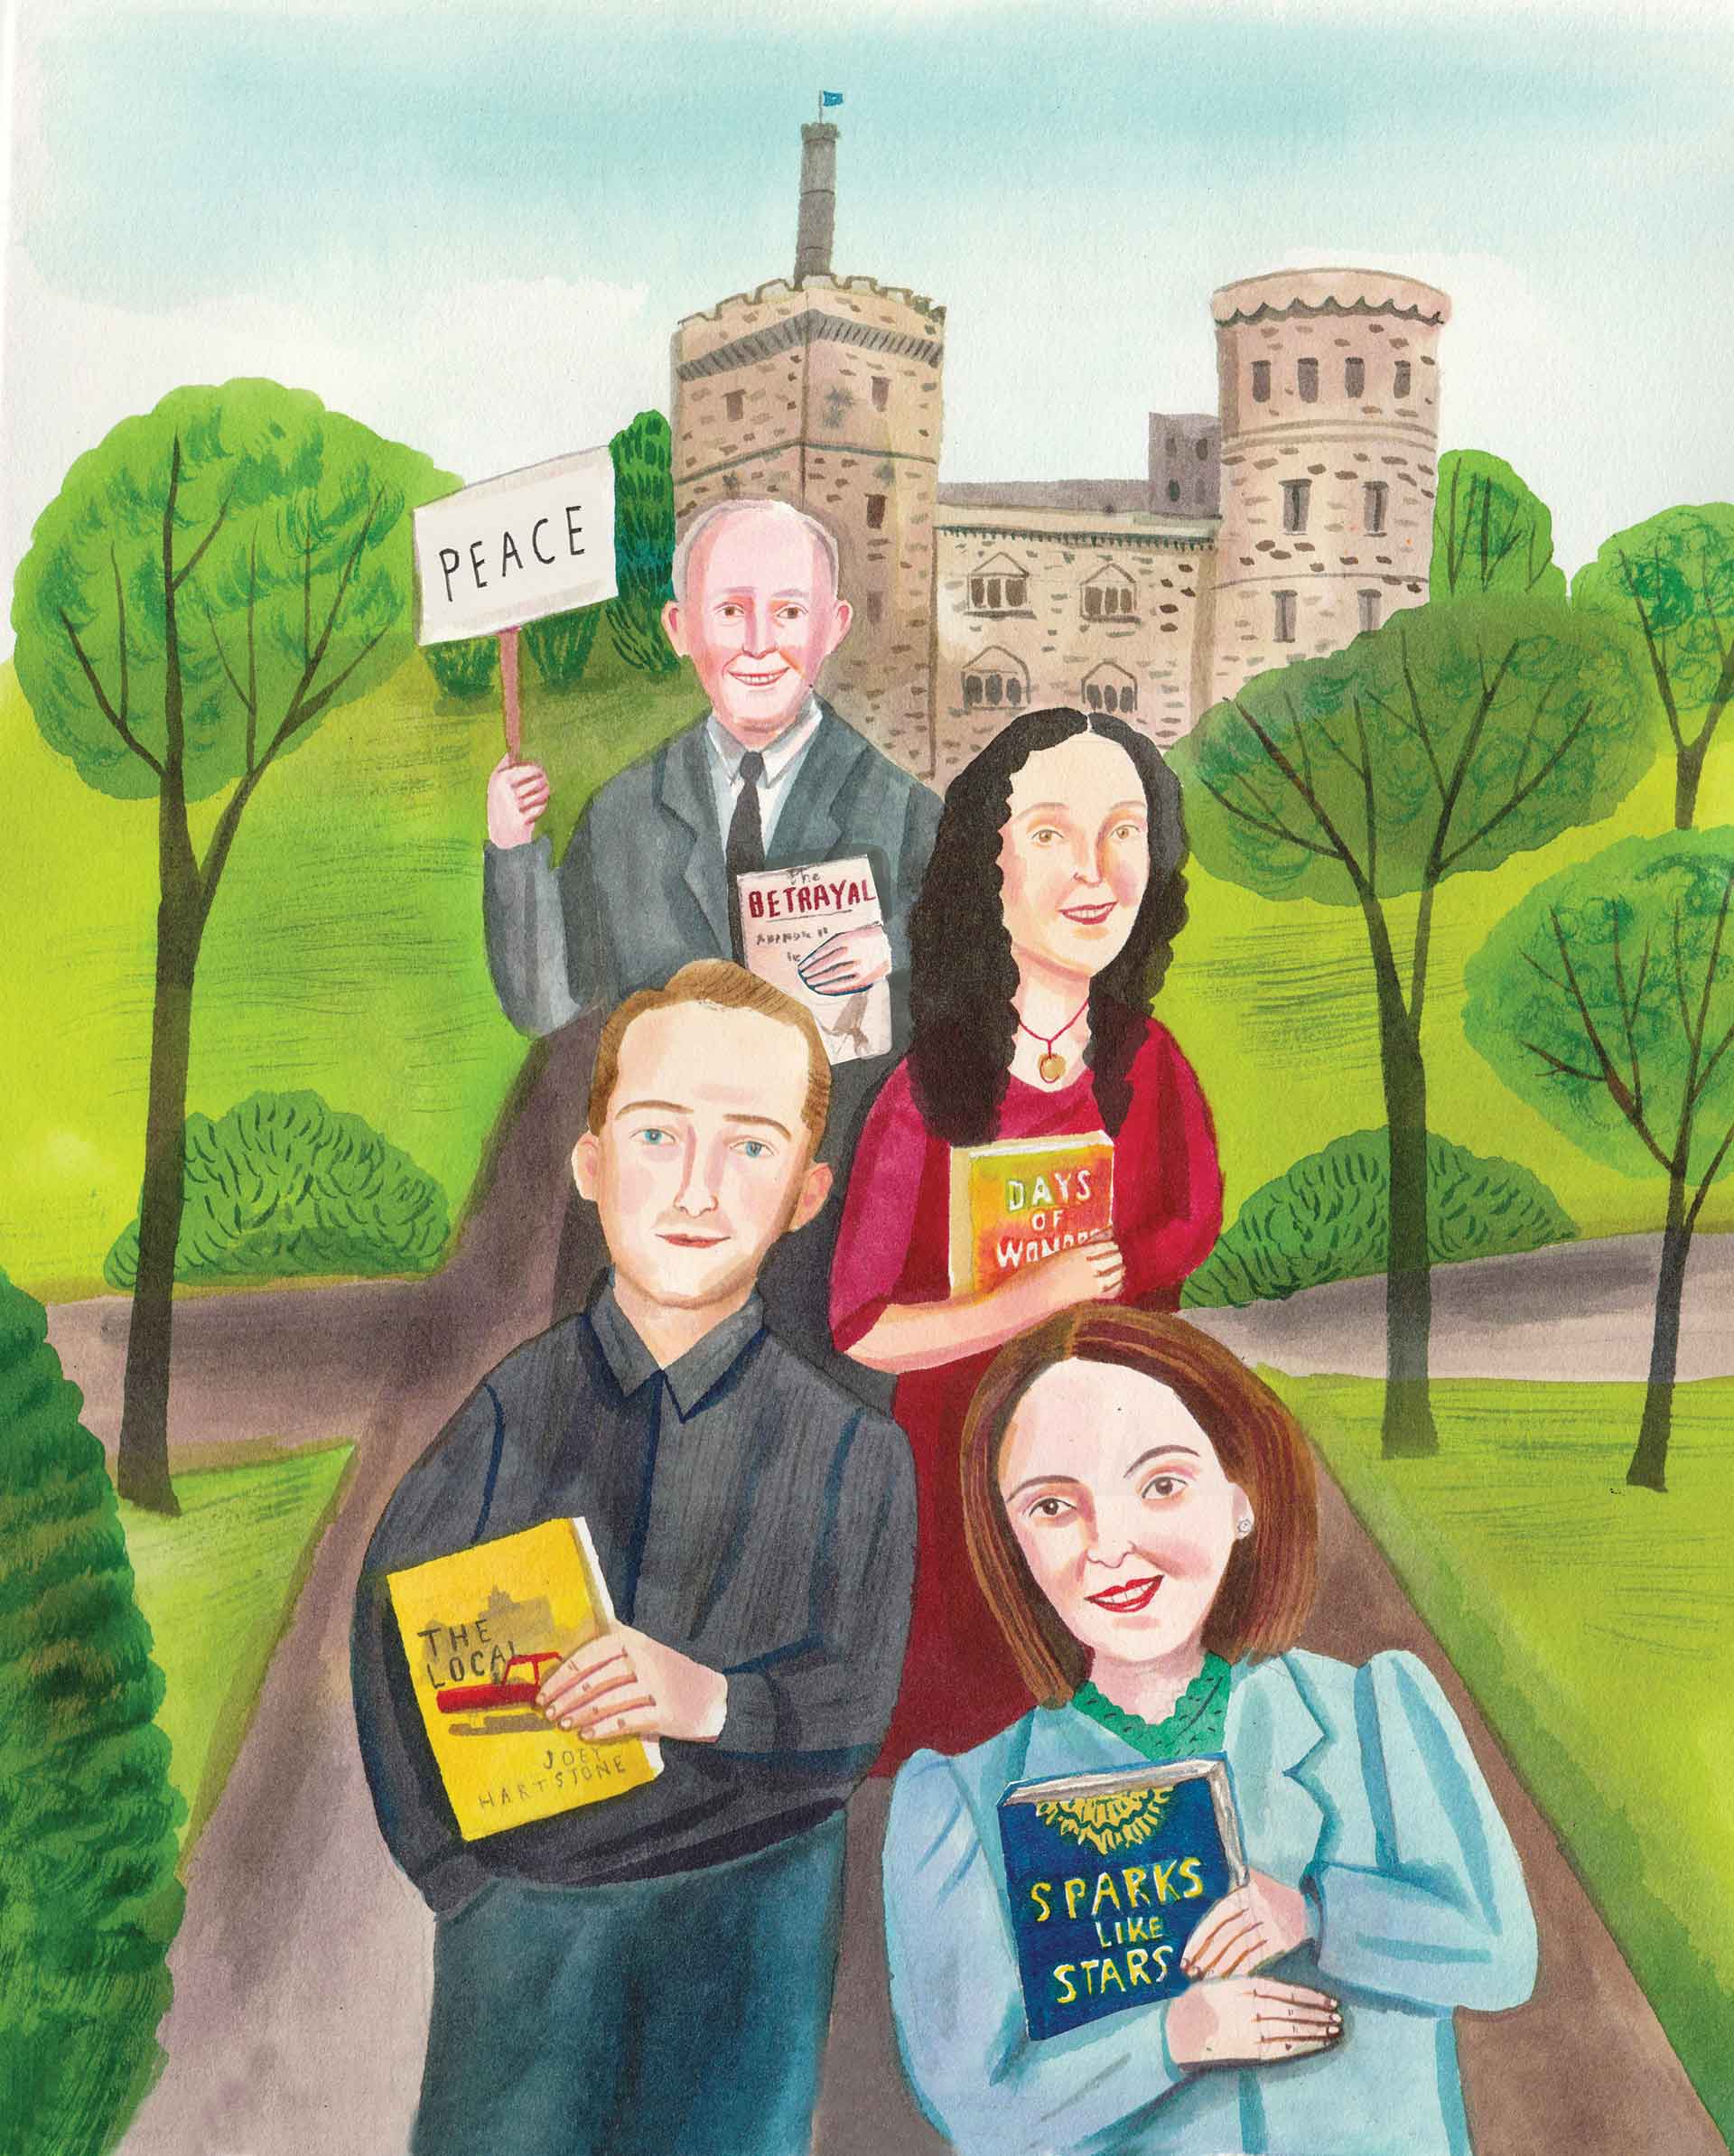 Illustration of 4 people holding different books standing in front of the Castle at Brandeis